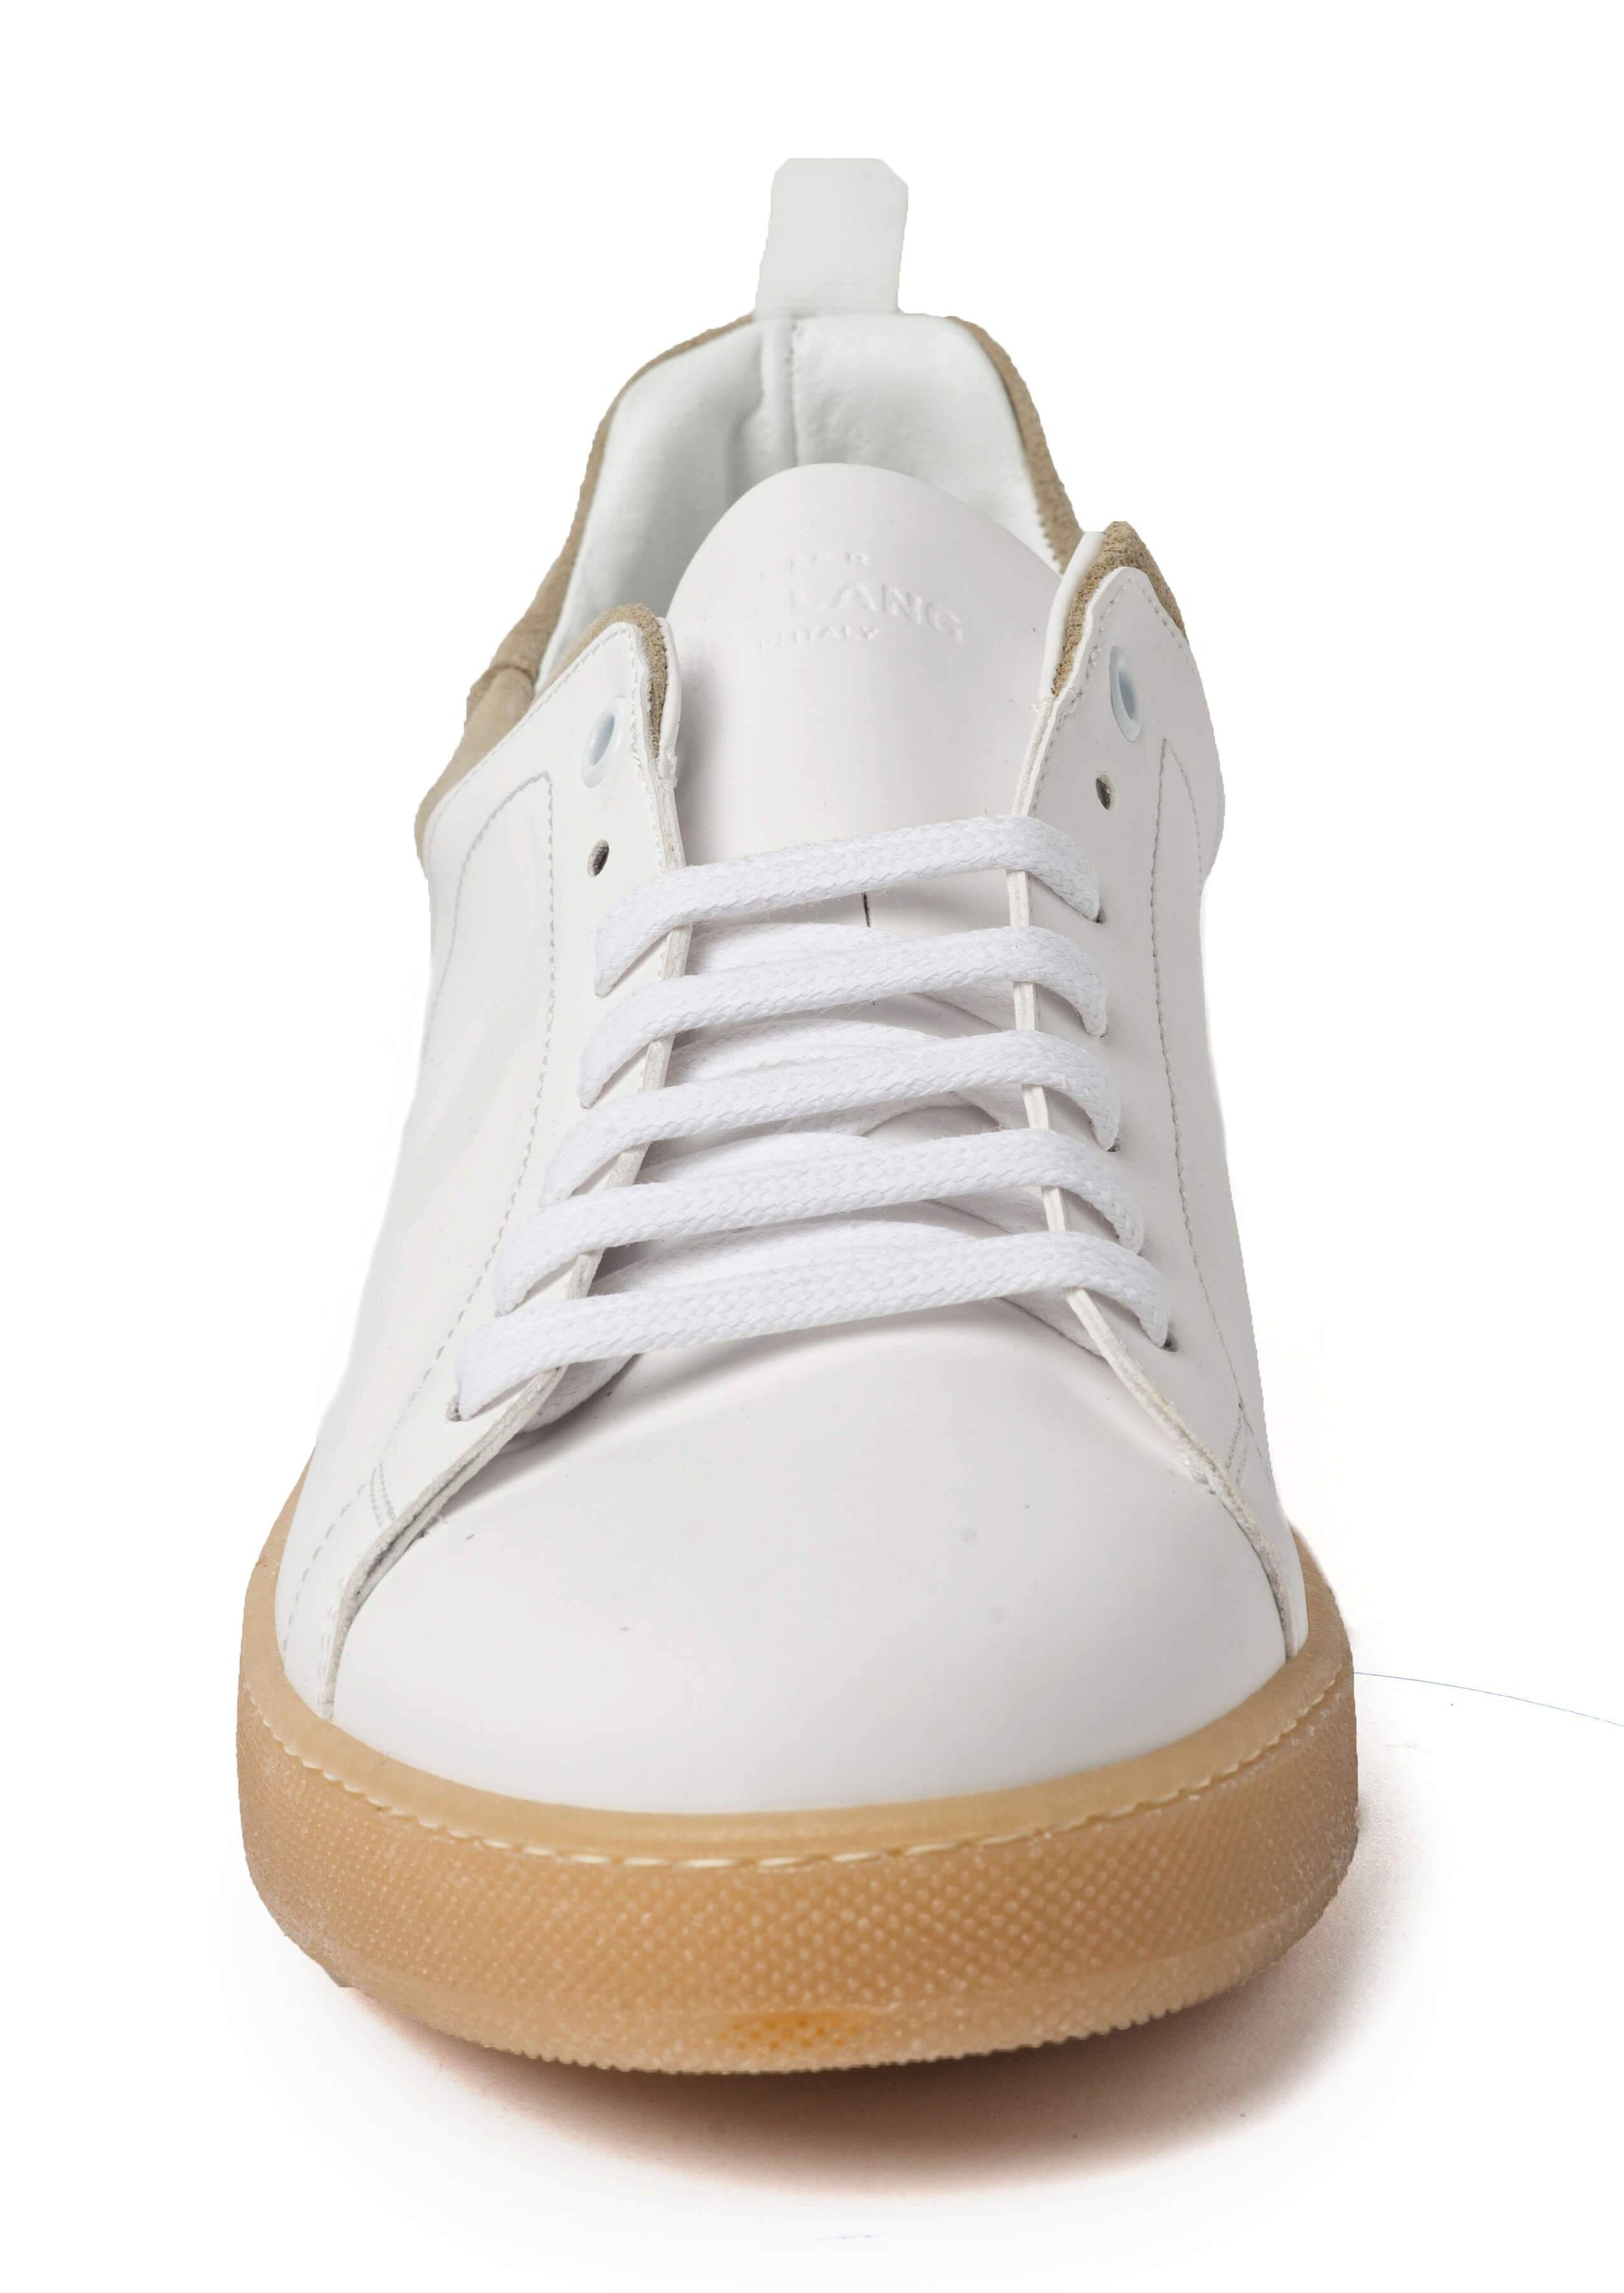 White Beige Sneakers for Men 3839-WB - Jared Lang